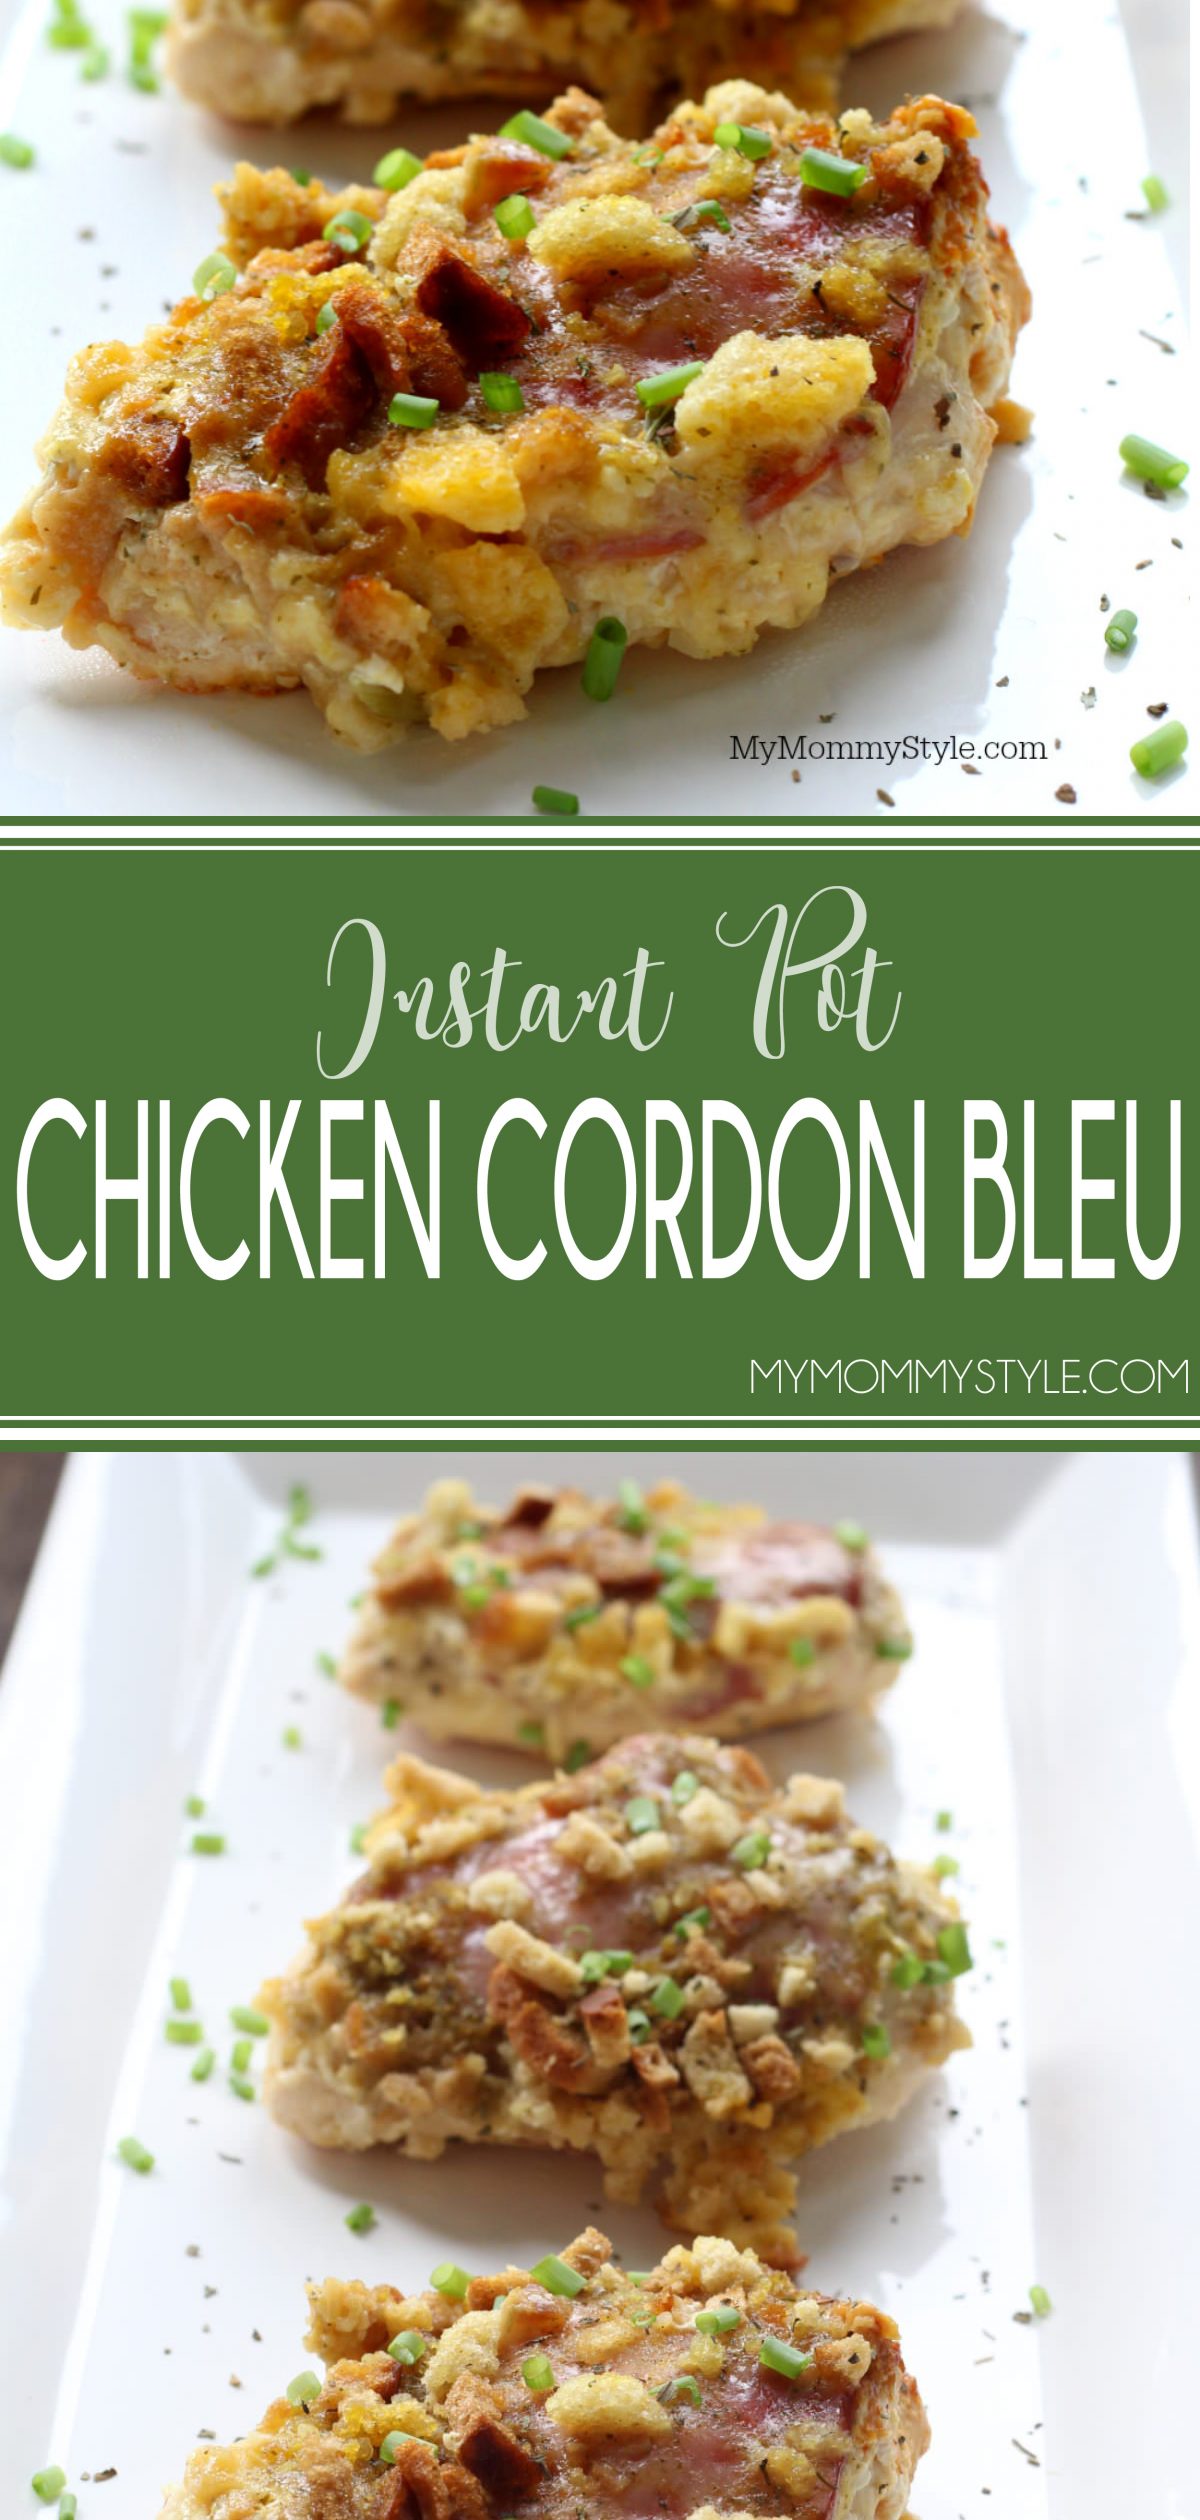 This Instant Pot Chicken Cordon Bleu marries the same traditional flavors of Cordon Blue, but takes out the hassle of pounding the meal, rolling up the layers, and cuts out tons of time. via @mymommystyle